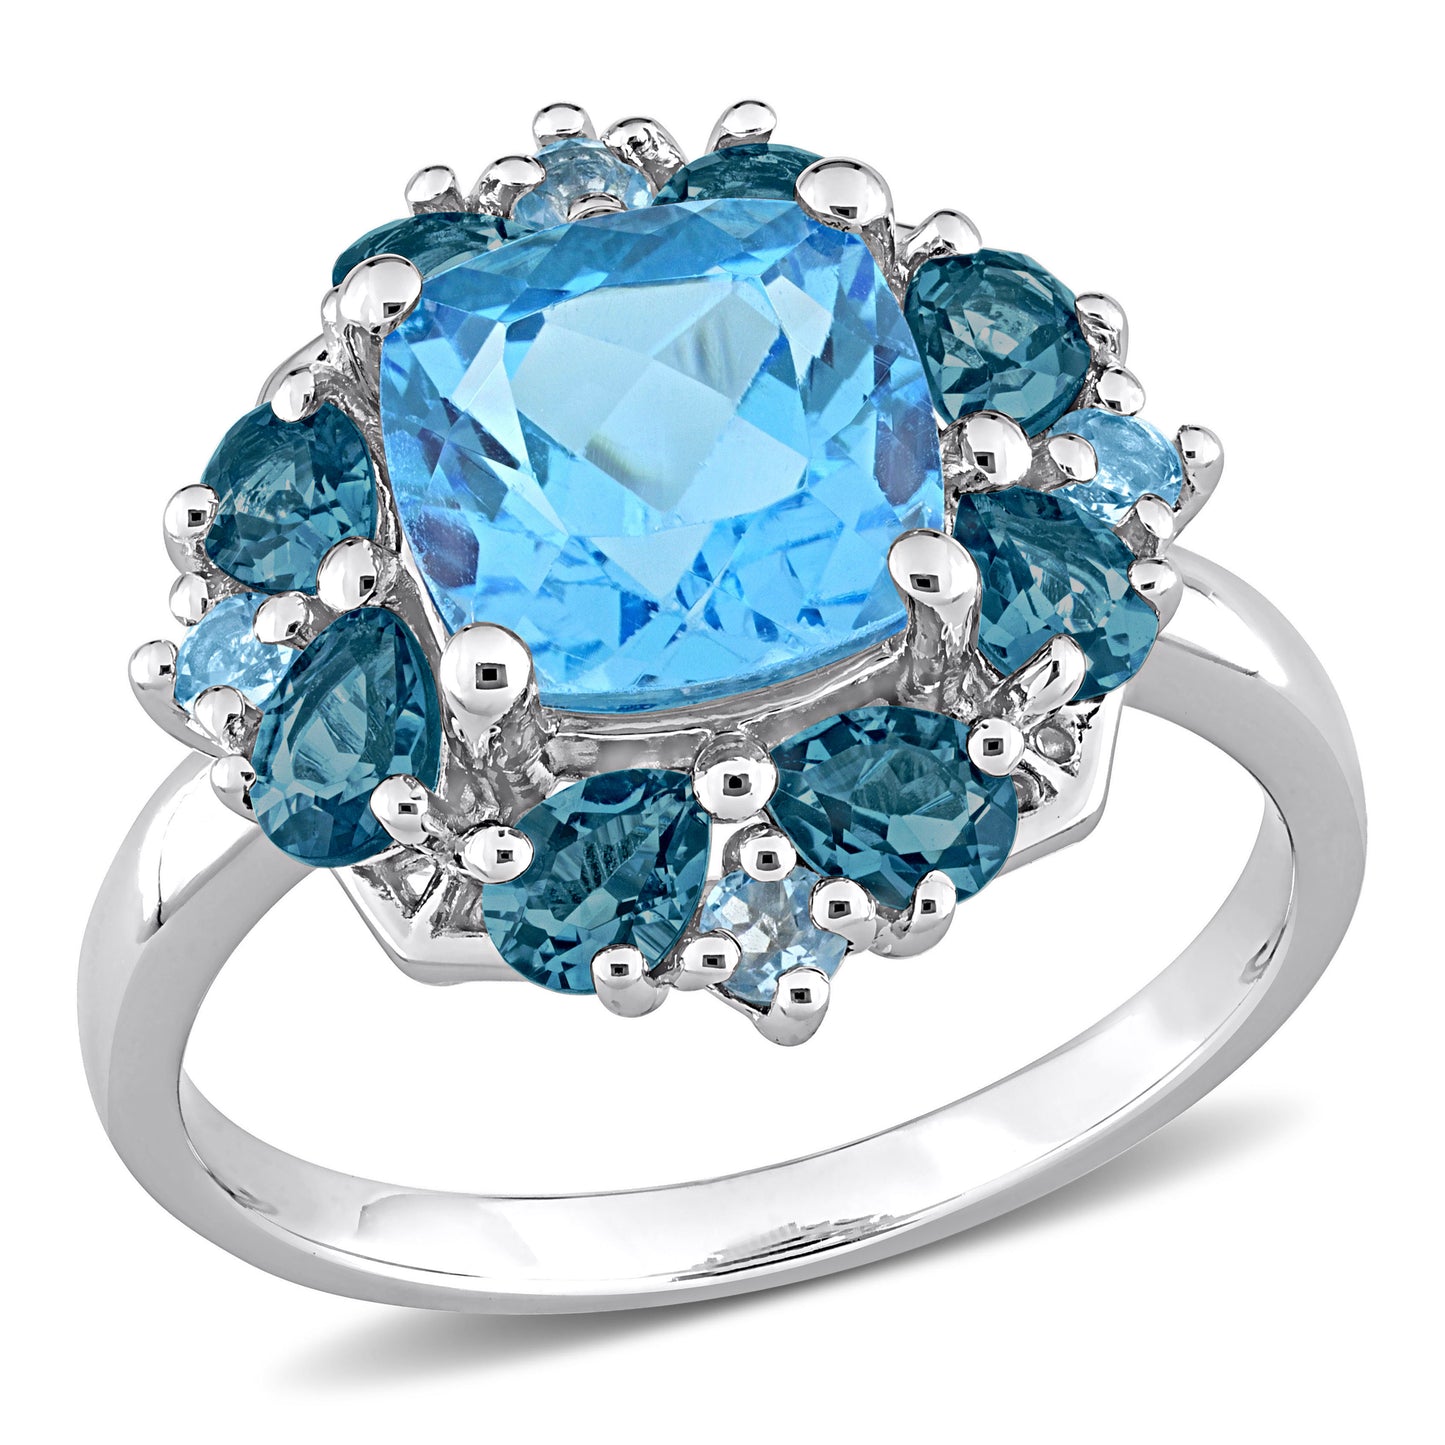 4 1/10ct Blue Topaz Art Deco Ring in Sterling Silver